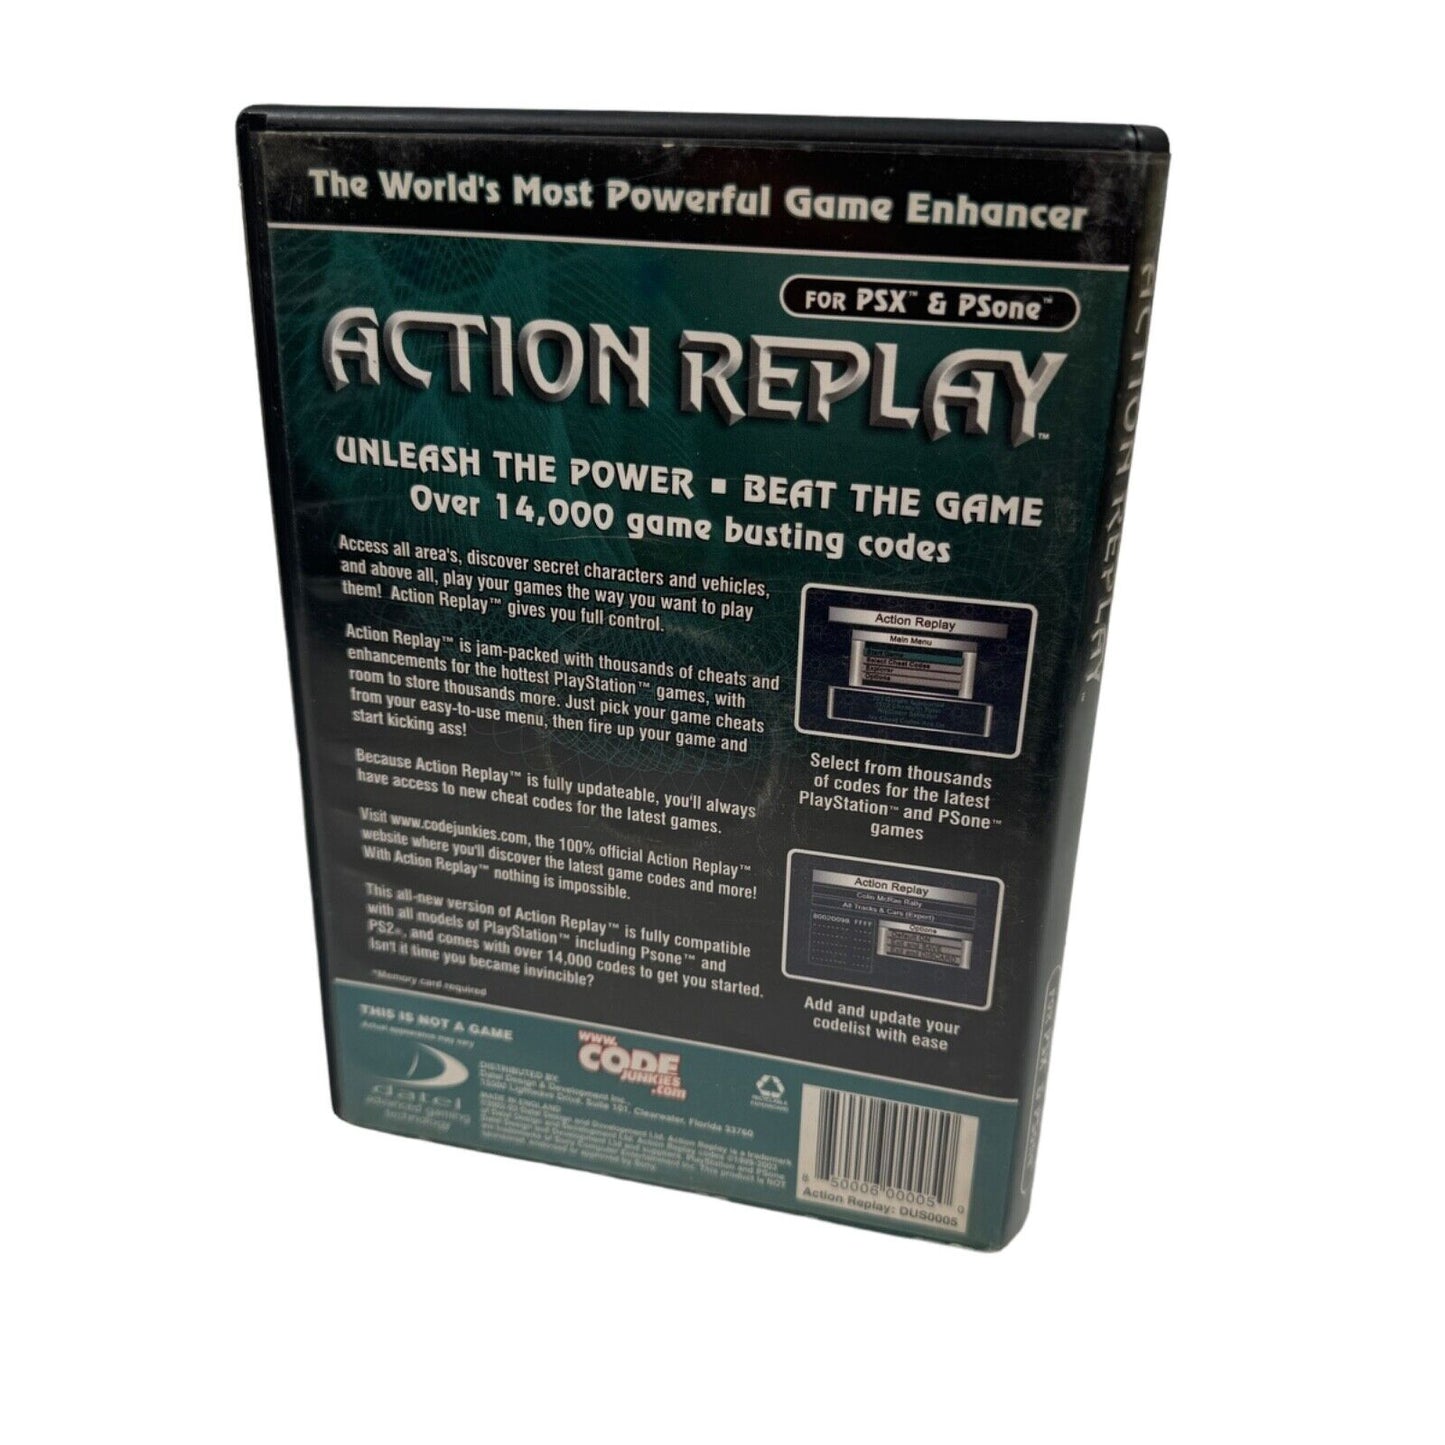 Action Replay Cheat Code Disc PlayStation 1 PS1 PSone PSX W/ Case (No Manual)